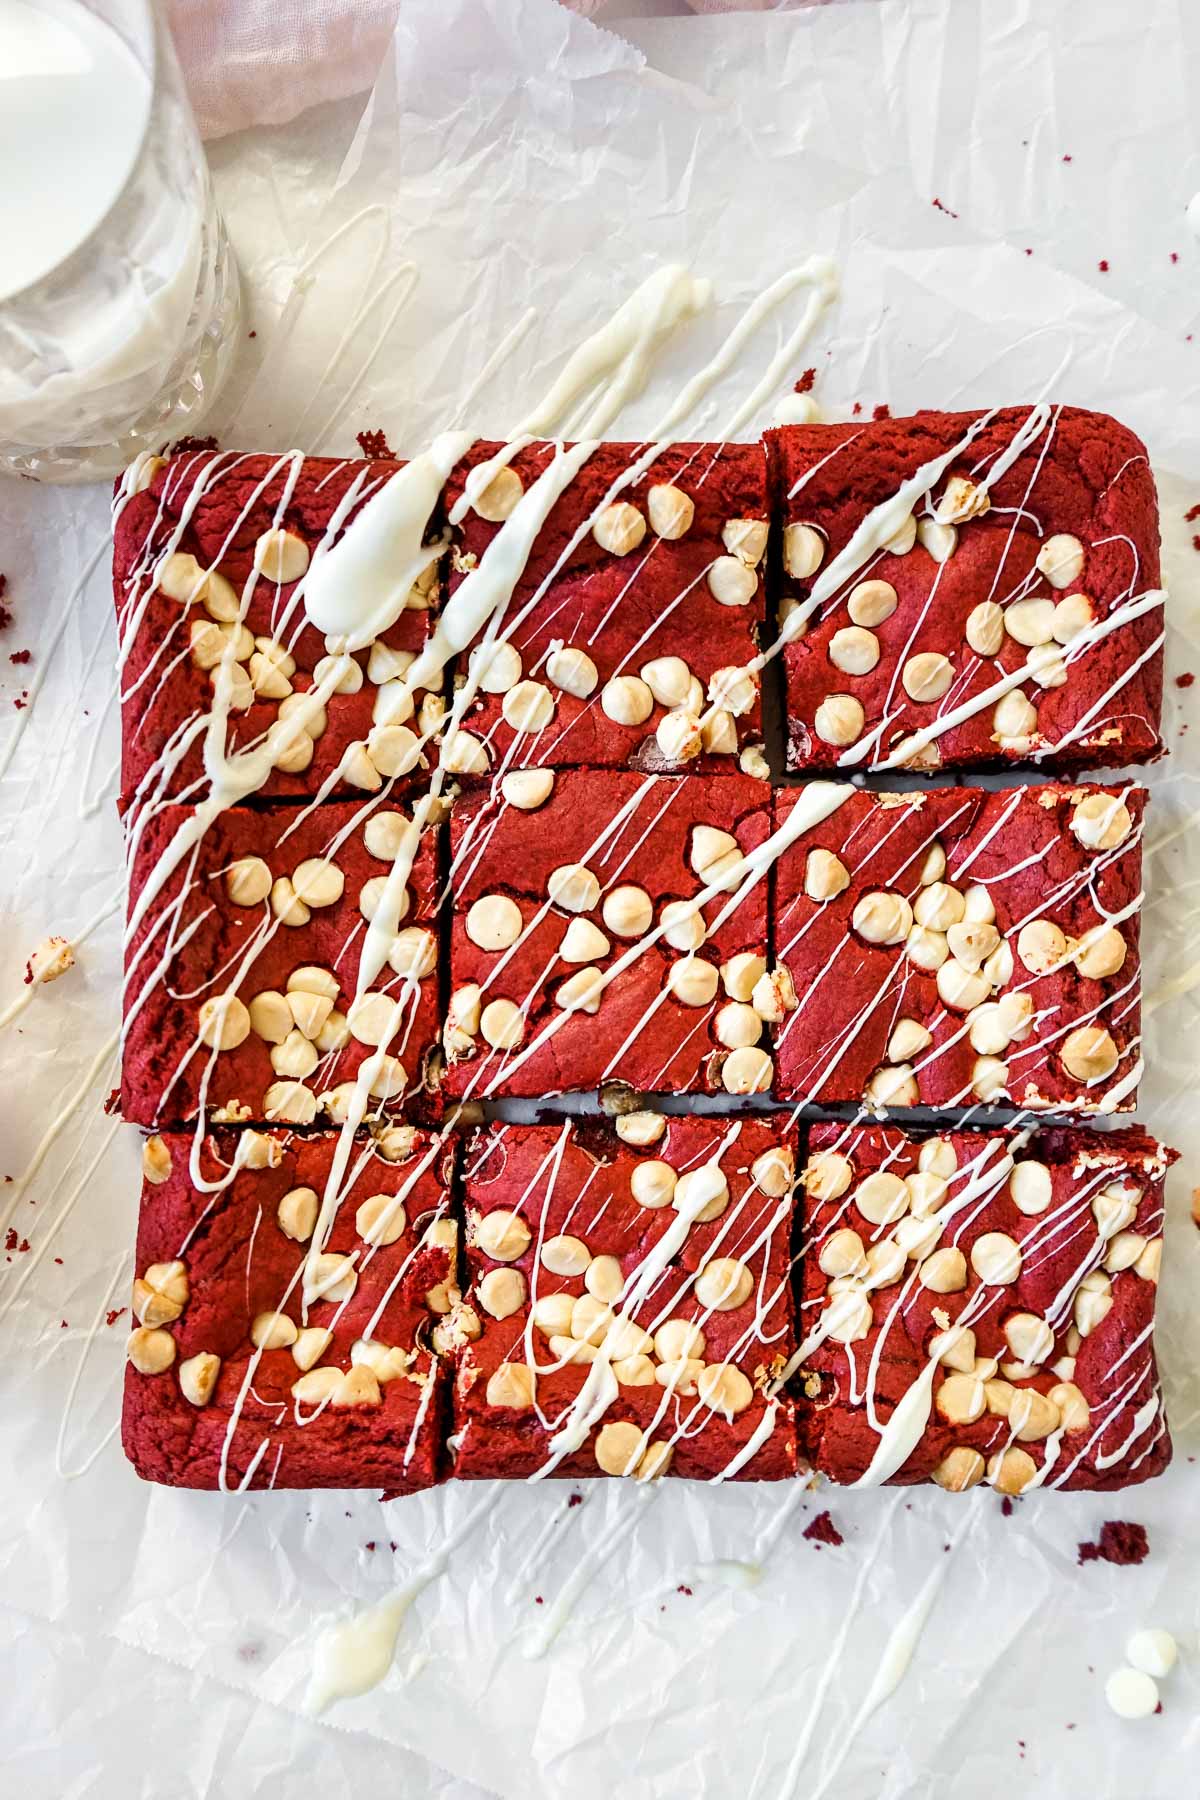 Red Velvet Brownies with White Chocolate Chips on a table drizzled with white chocolate.